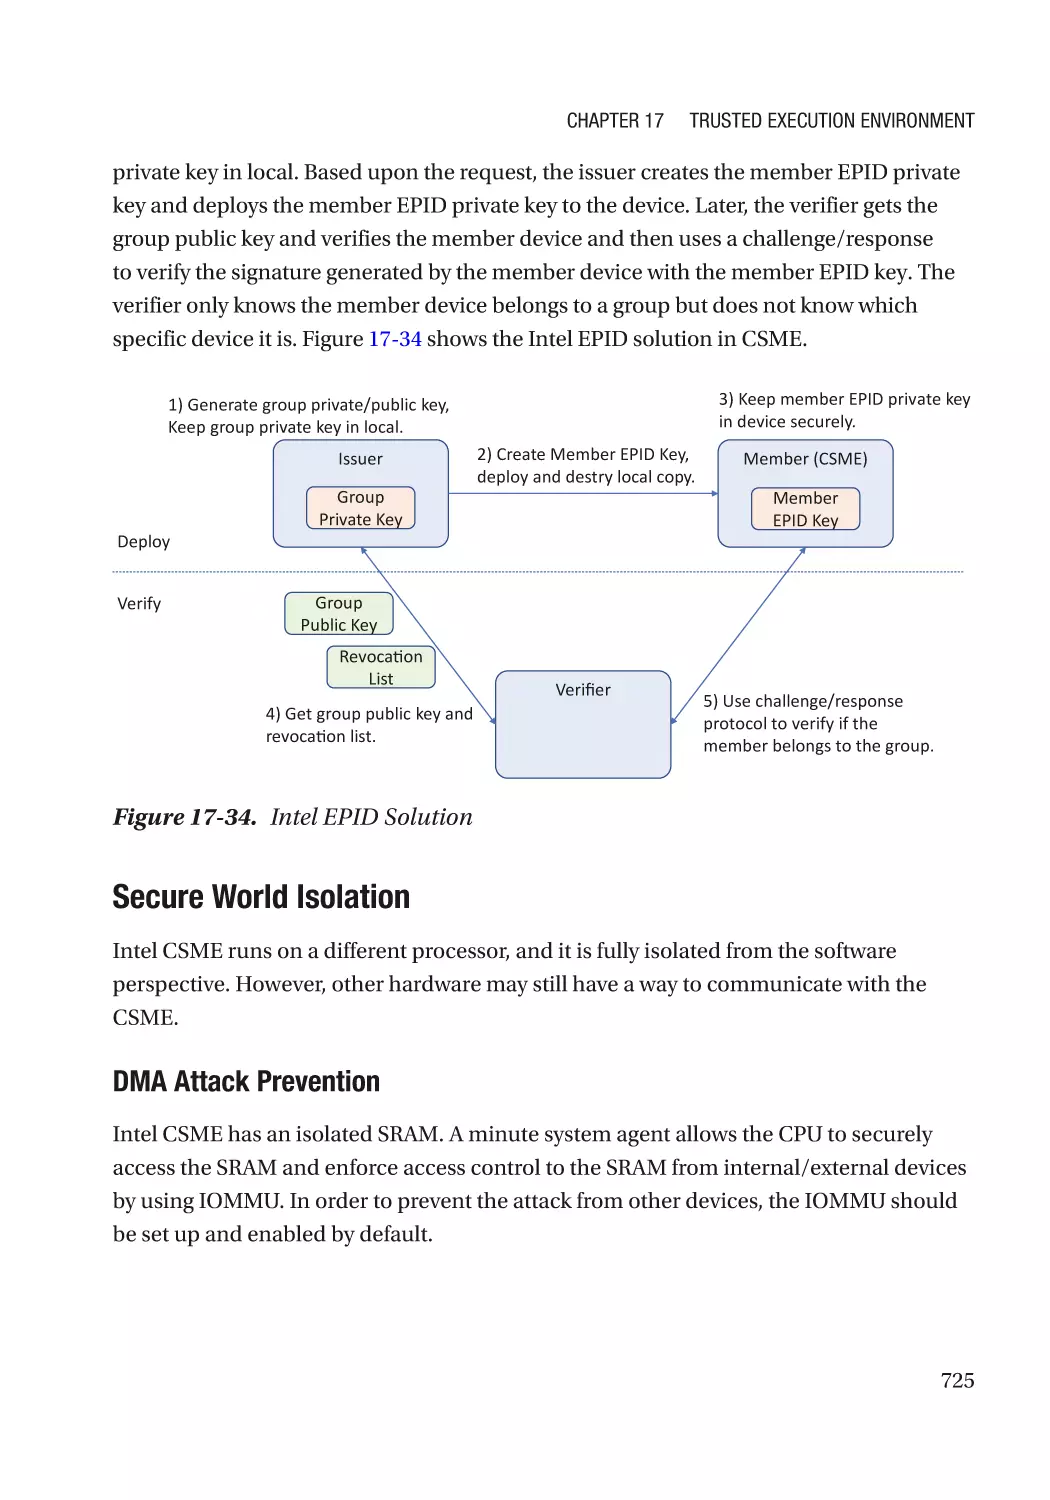 Secure World Isolation
DMA Attack Prevention